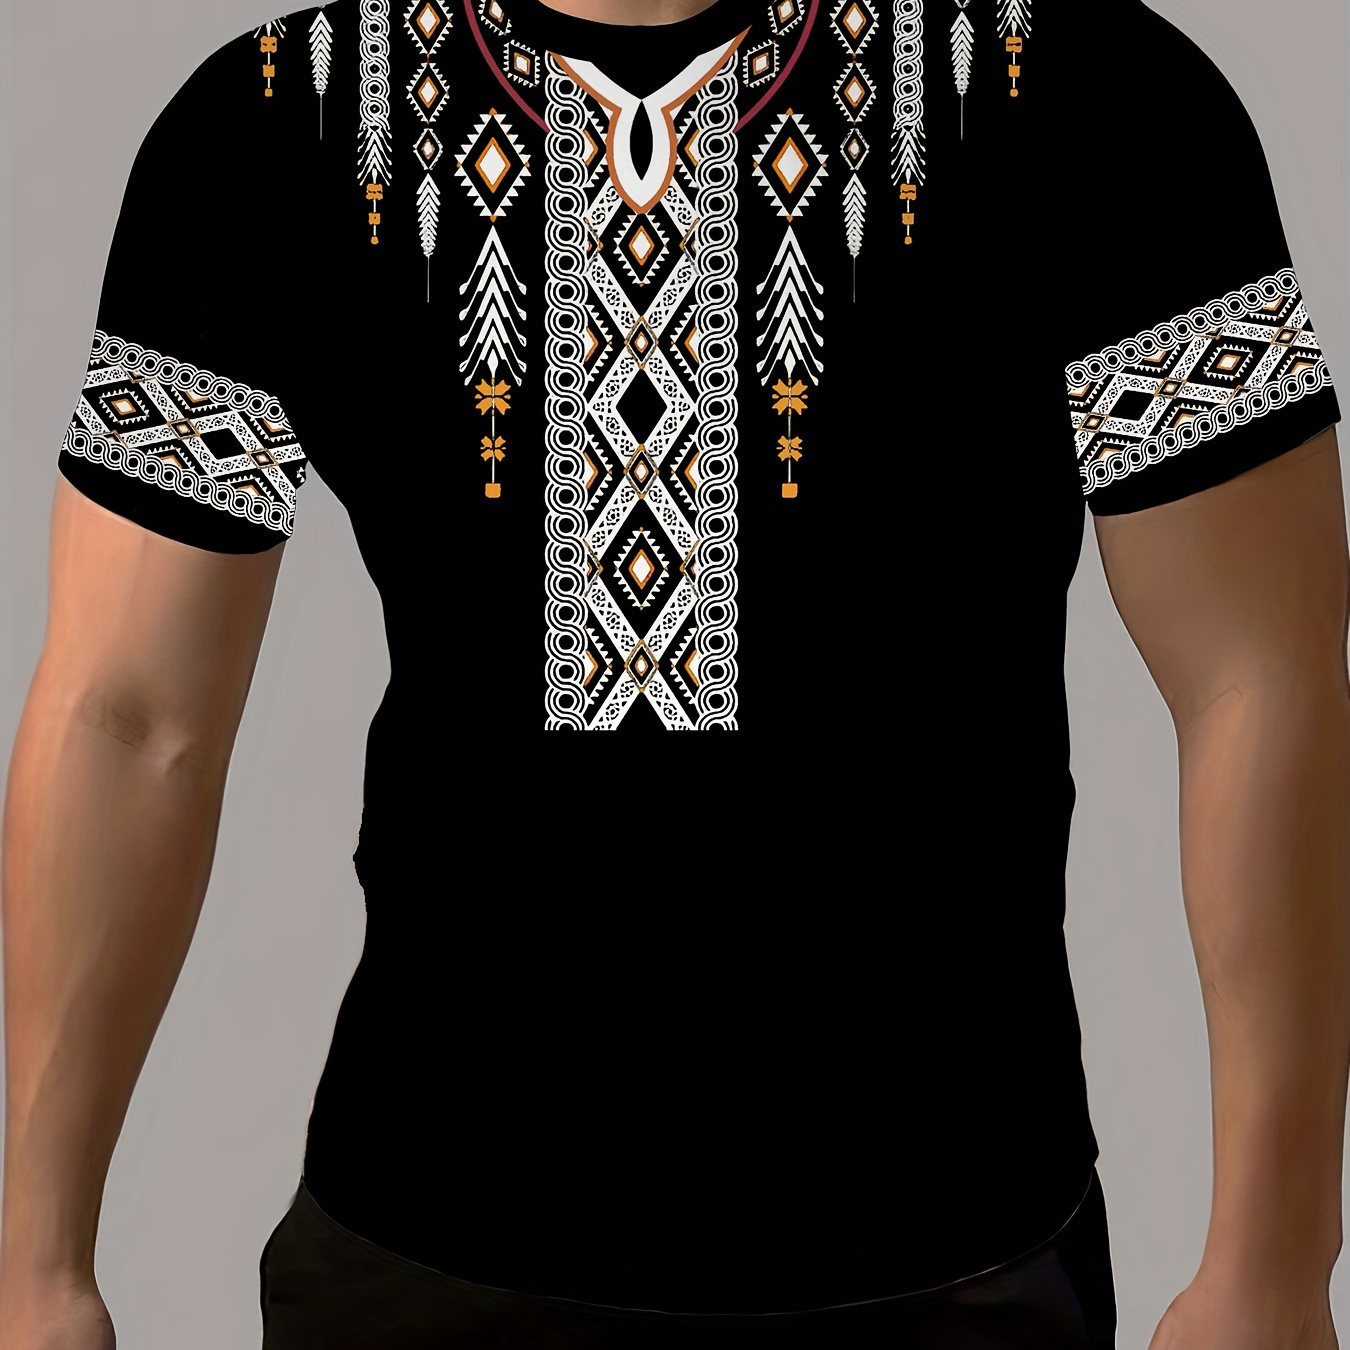 

Ethnic Pattern 3d Printed Crew Neck Short Sleeve T-shirt For Men, Casual Summer T-shirt For Daily Wear And Vacation Resorts